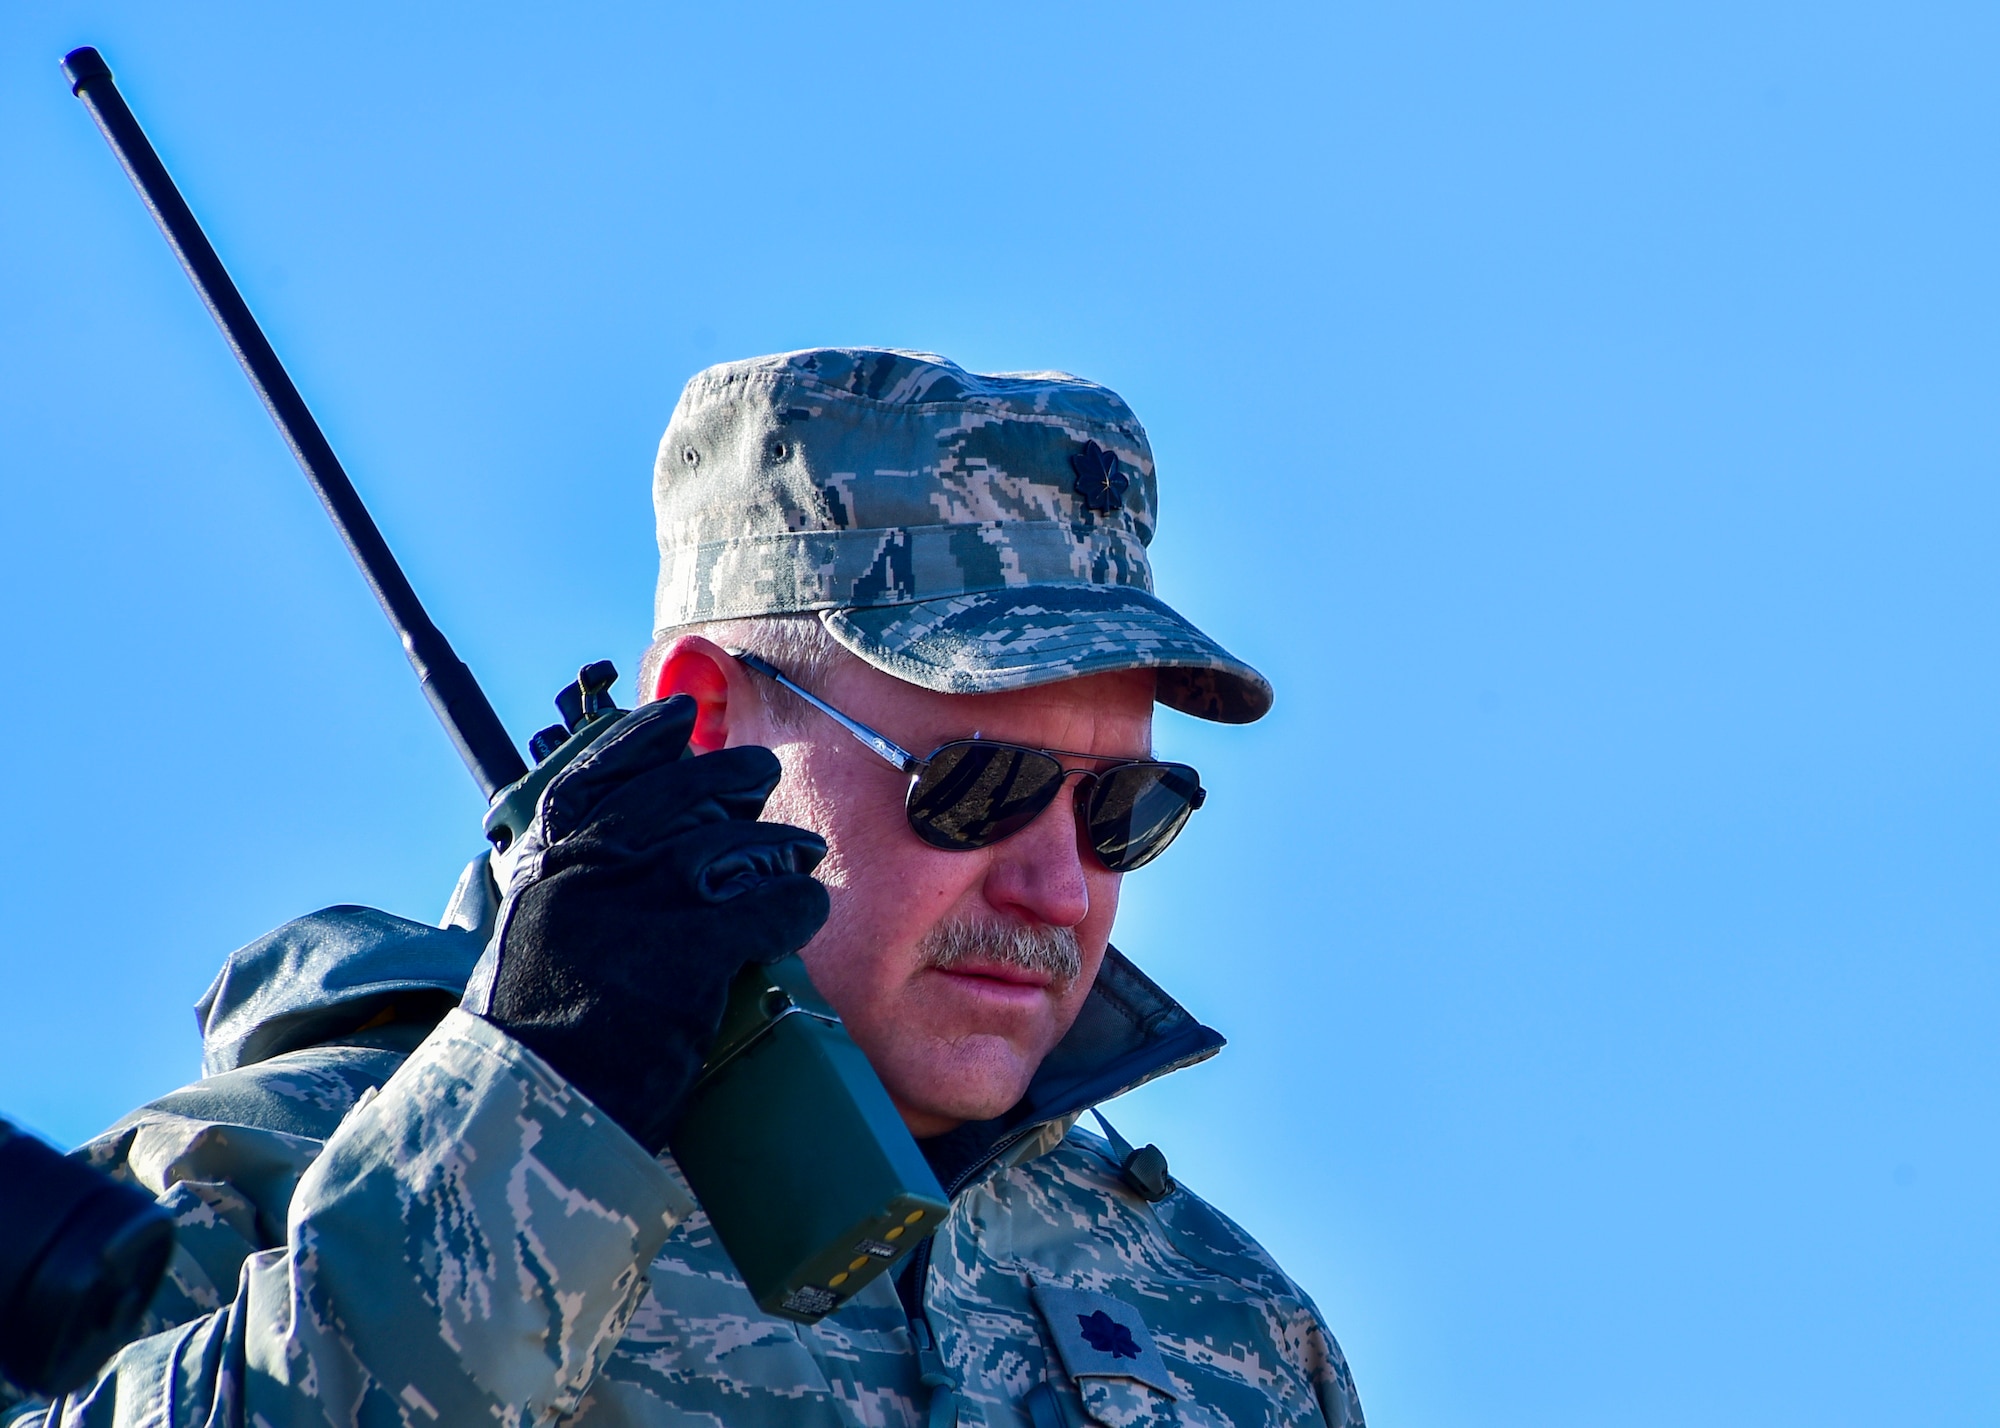 Lt. Col. Donald Teig, a medical entomologist assigned to the 757th Airlift Squadron, makes a radio call during an aerial spray mission over the Utah Test and Training Range, March 8.